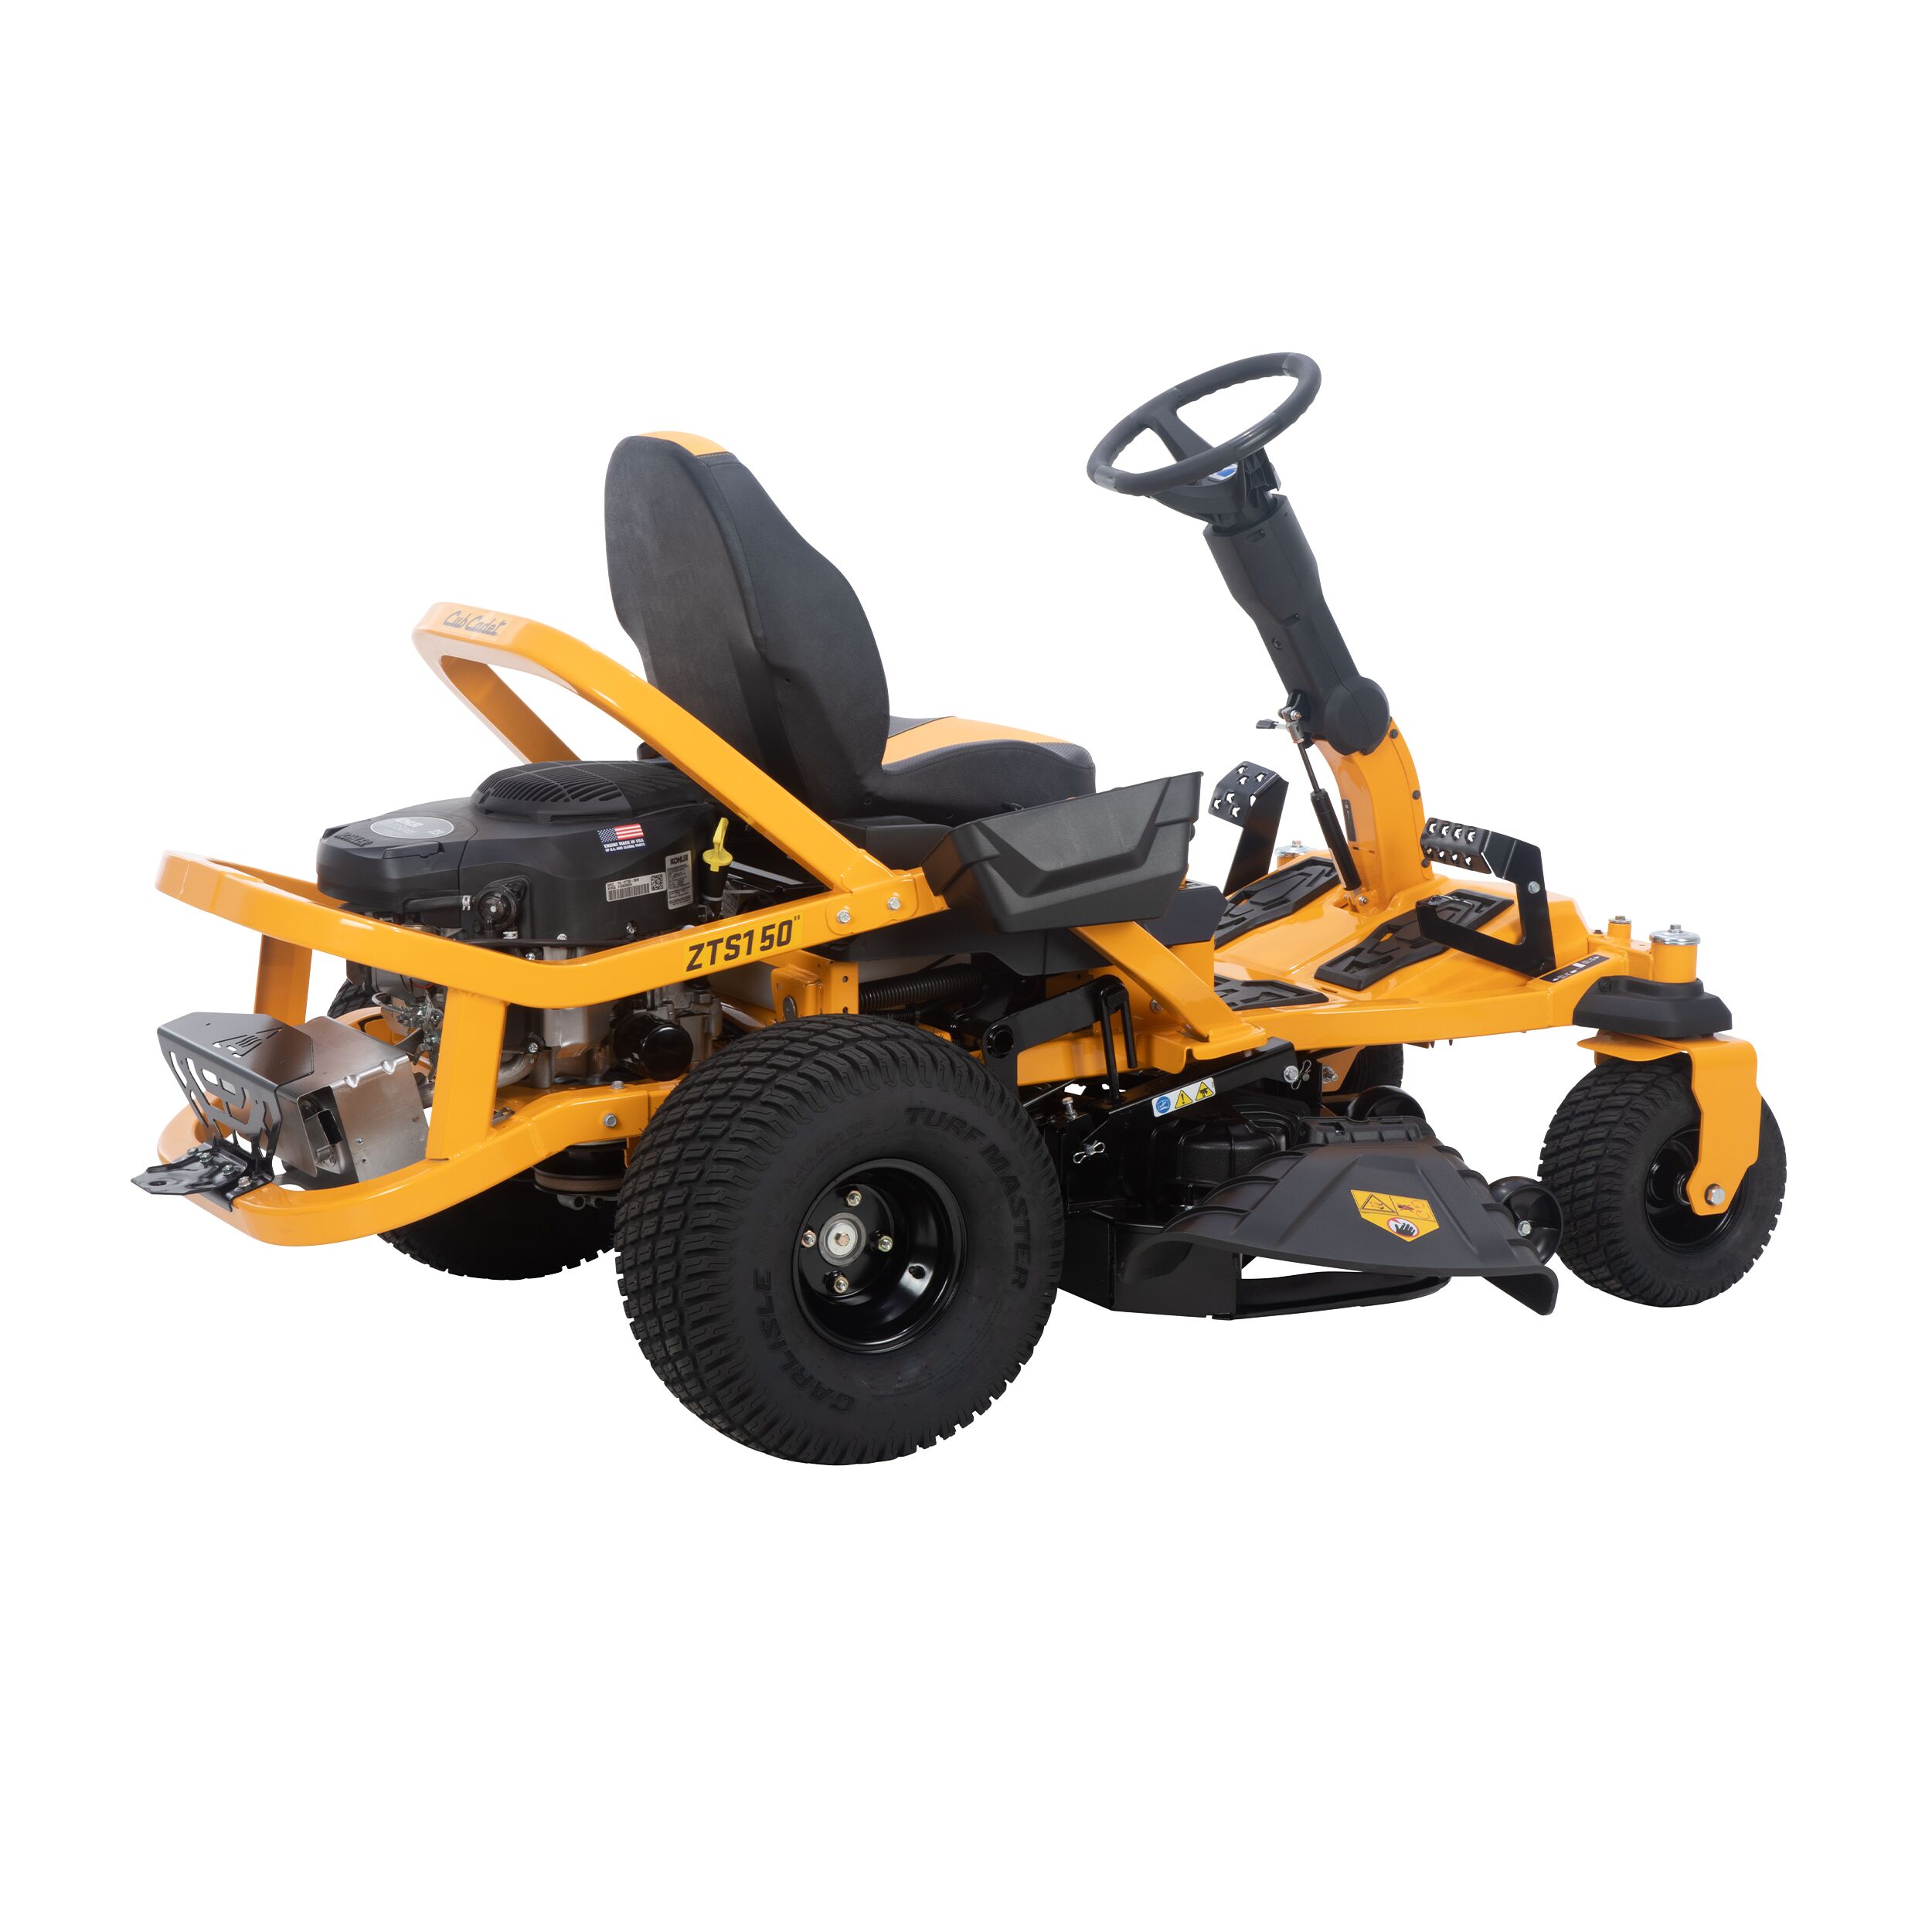 ZTS1 50 Zero-Turn Riding Lawn Mower 23HP with 50" Deck